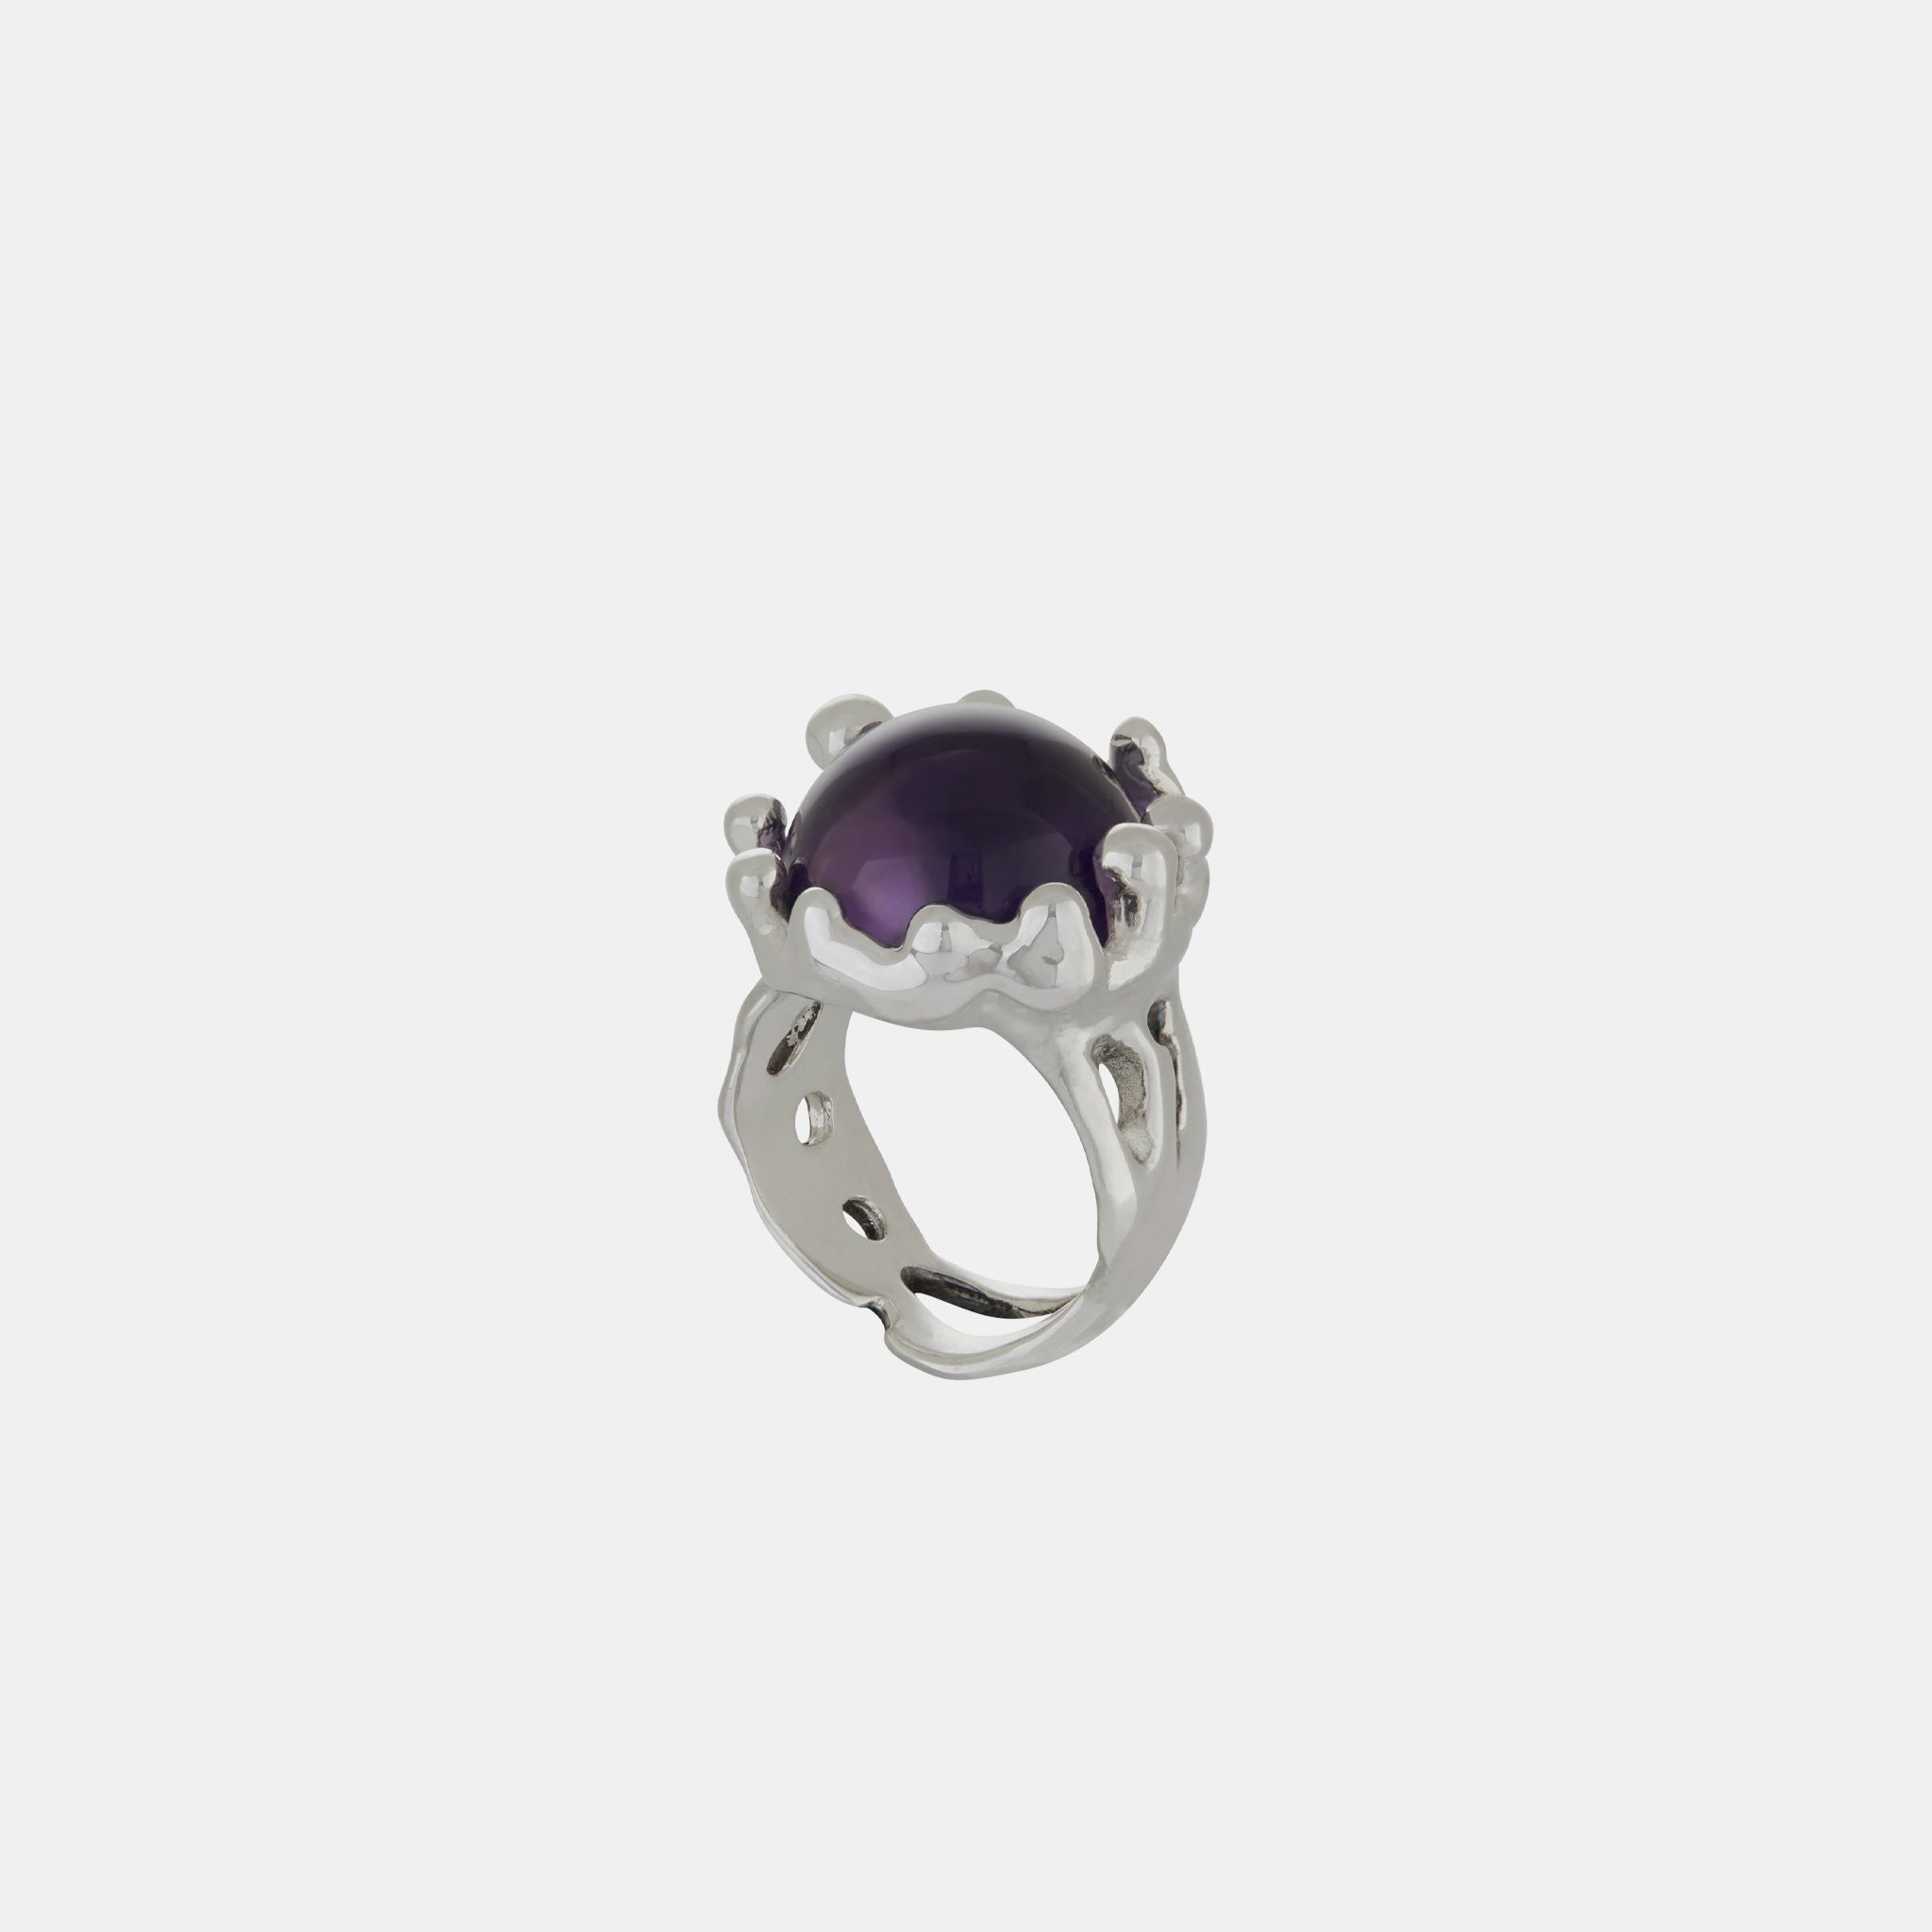 Close detail photo of the Magician Ring - Grape.